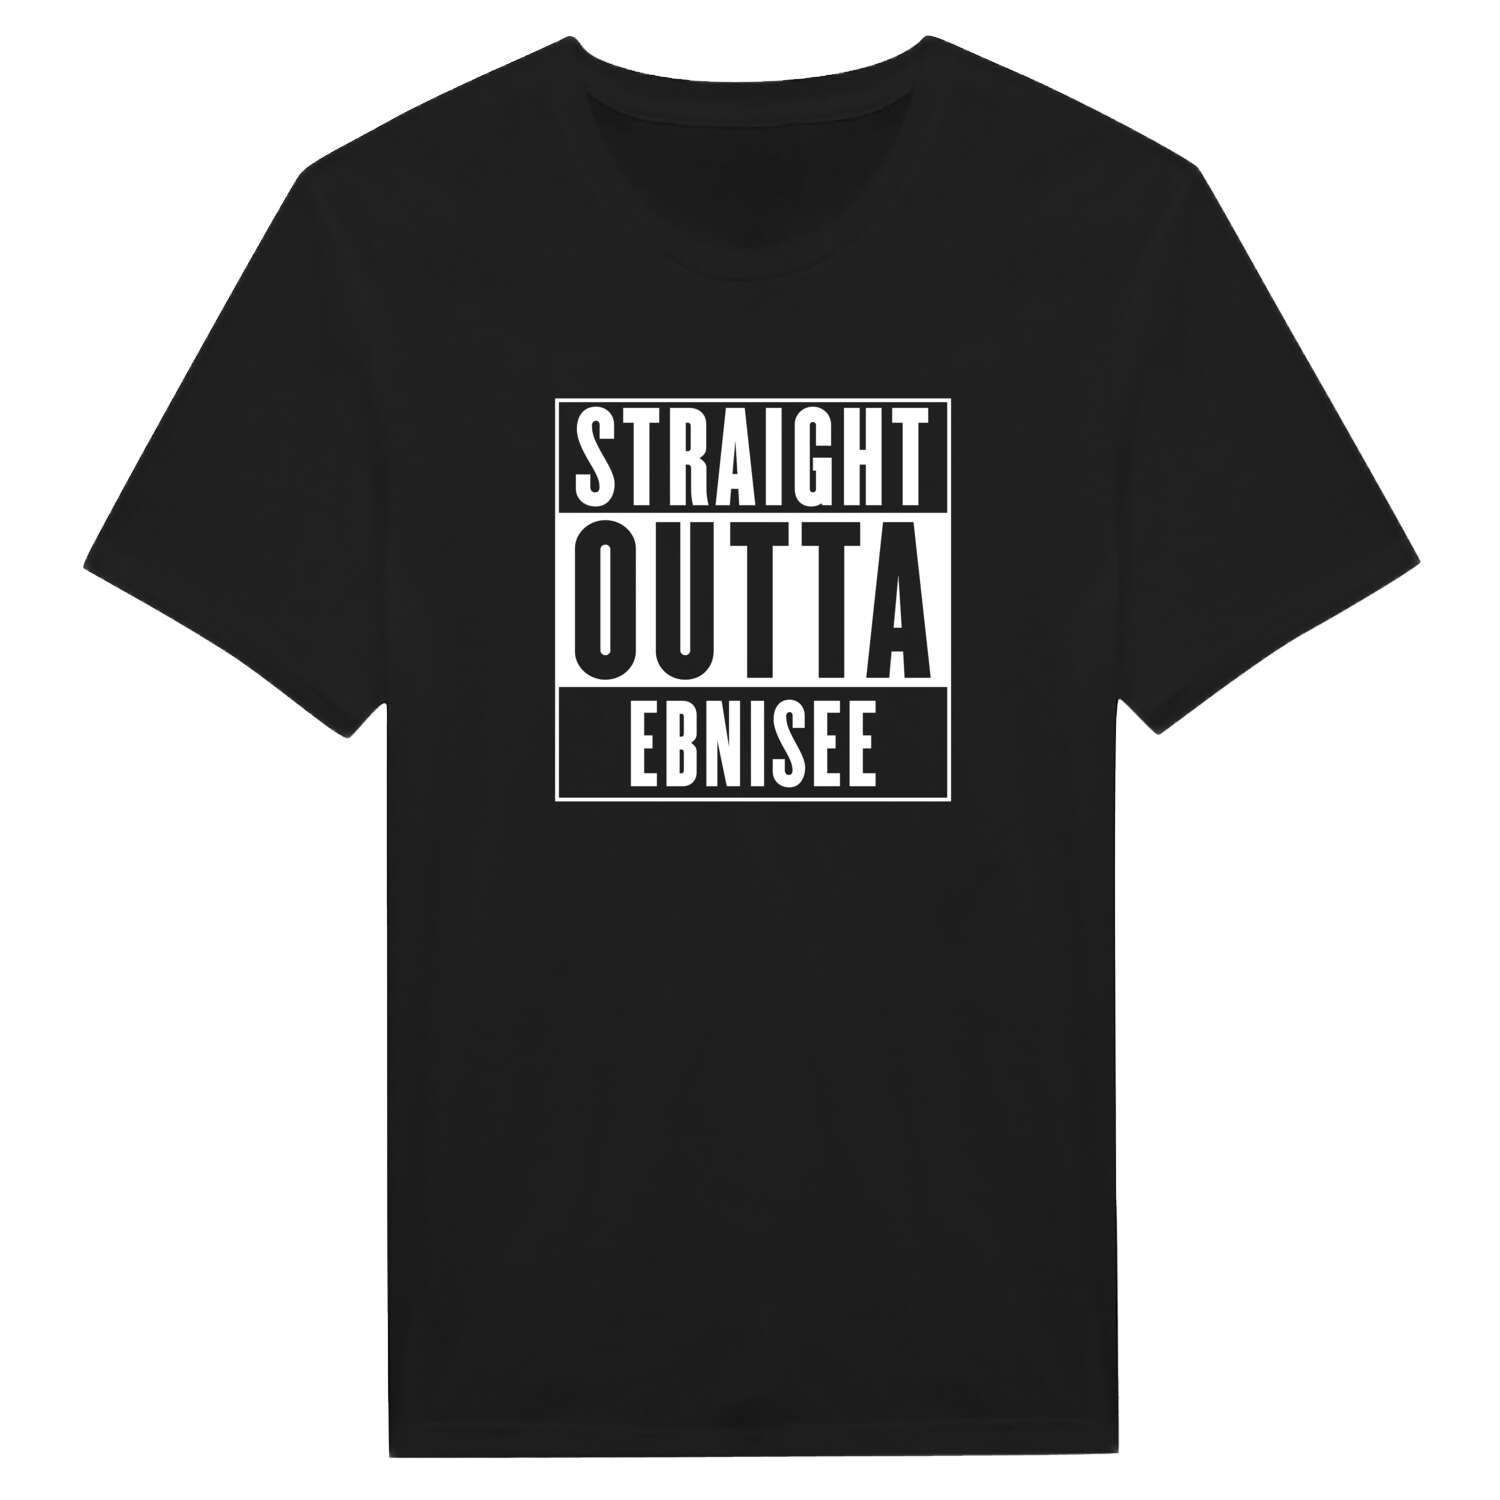 Ebnisee T-Shirt »Straight Outta«